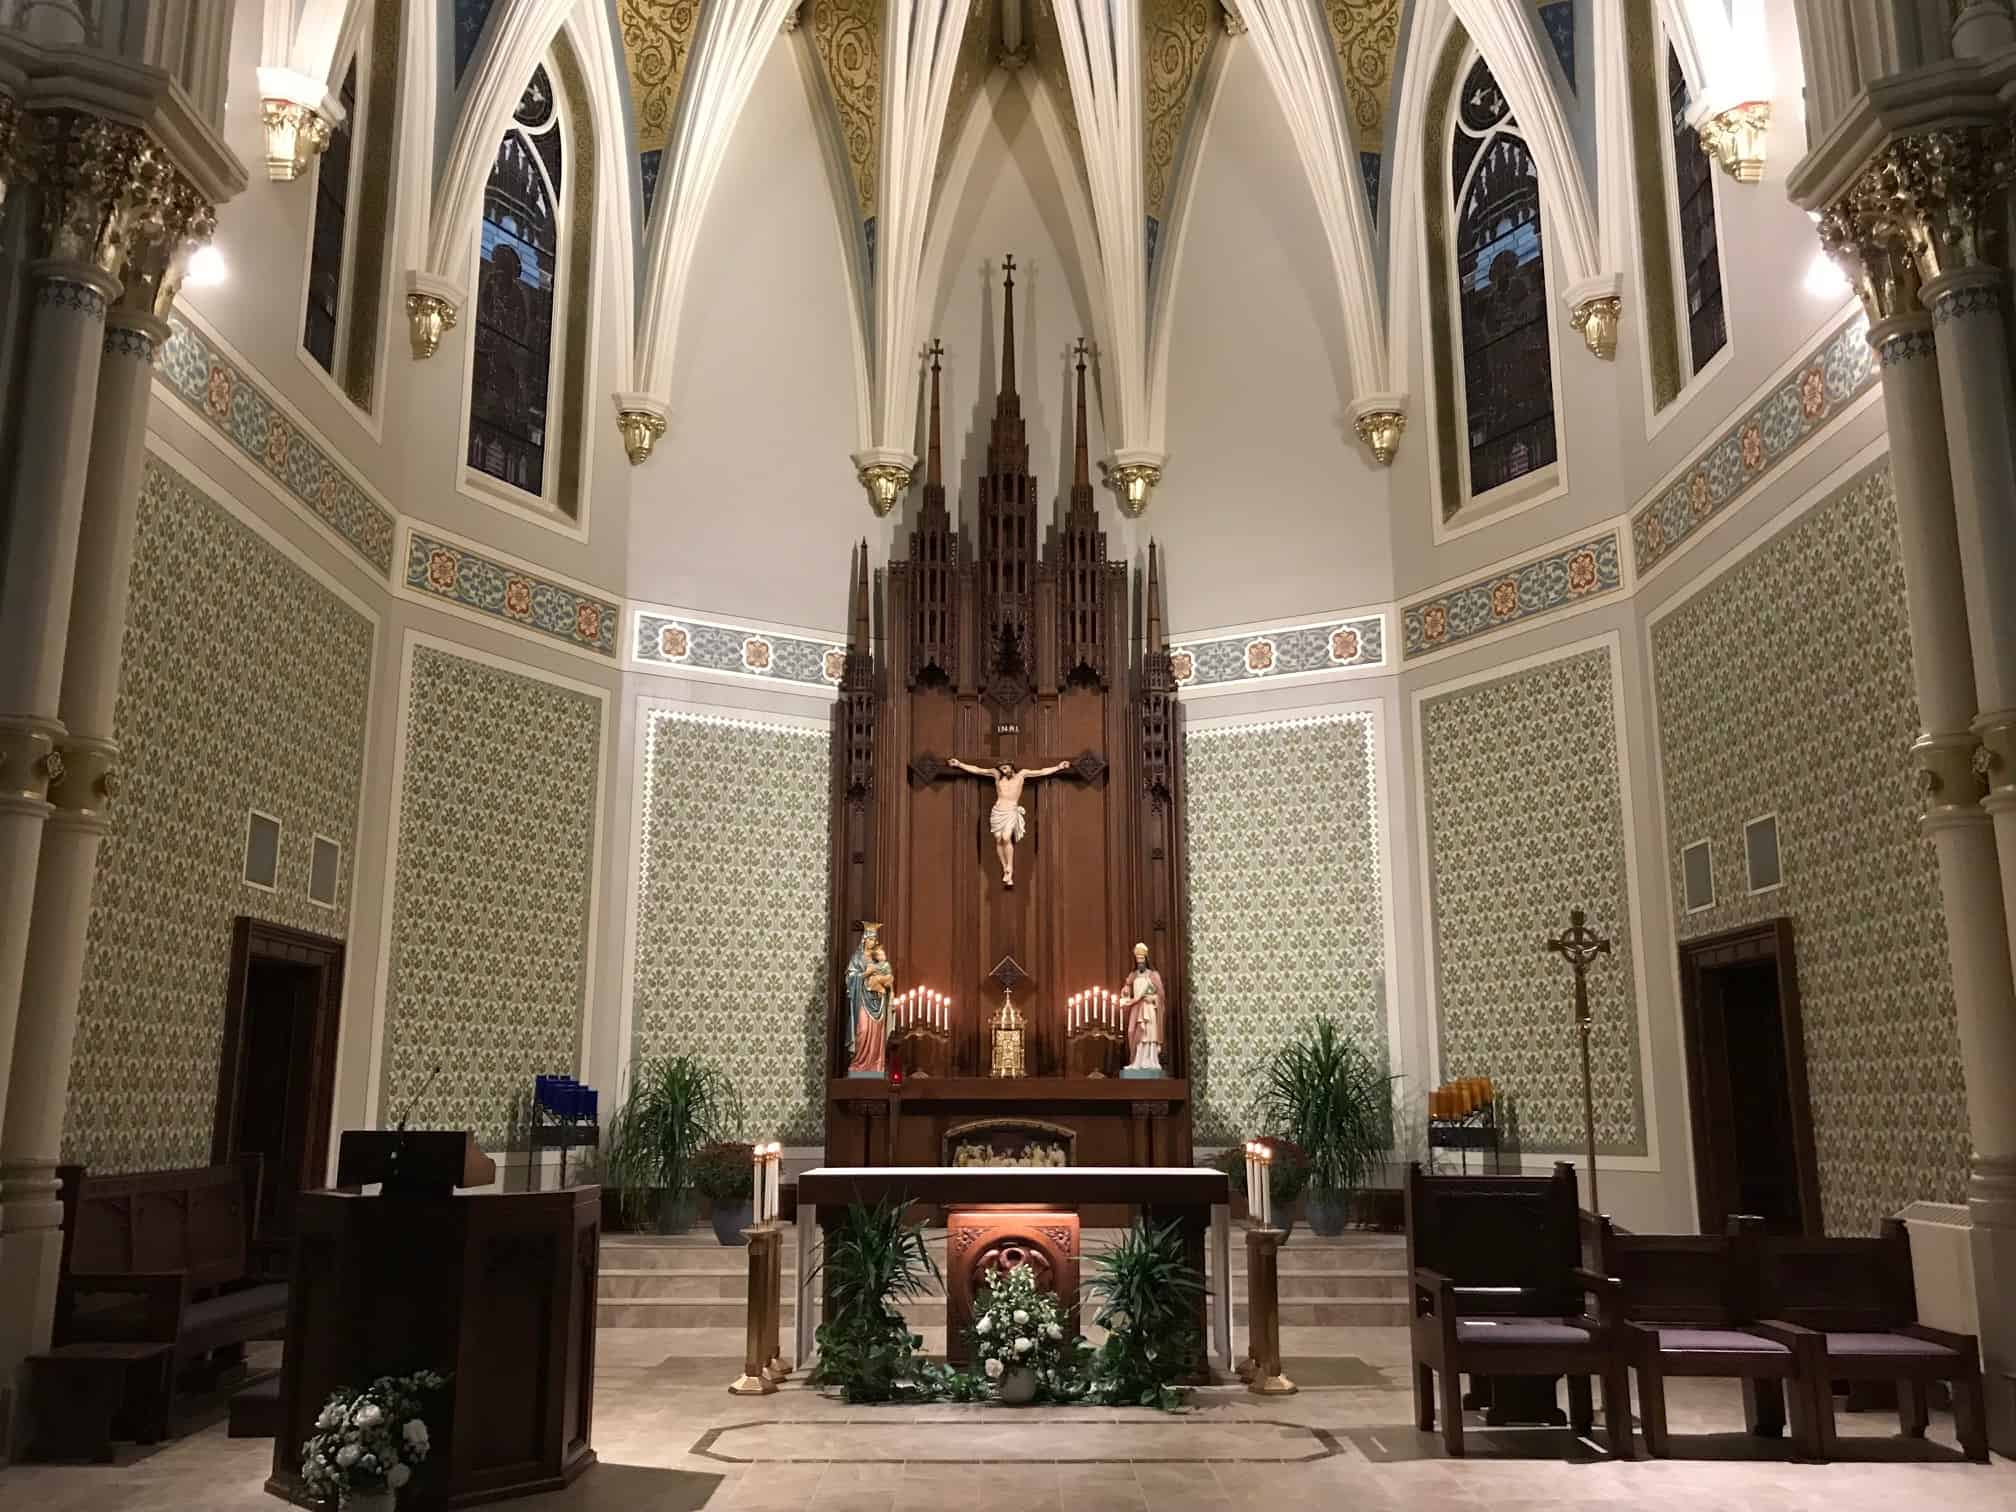 sanctuary and altar with tabernacle and candles in front of crucifix